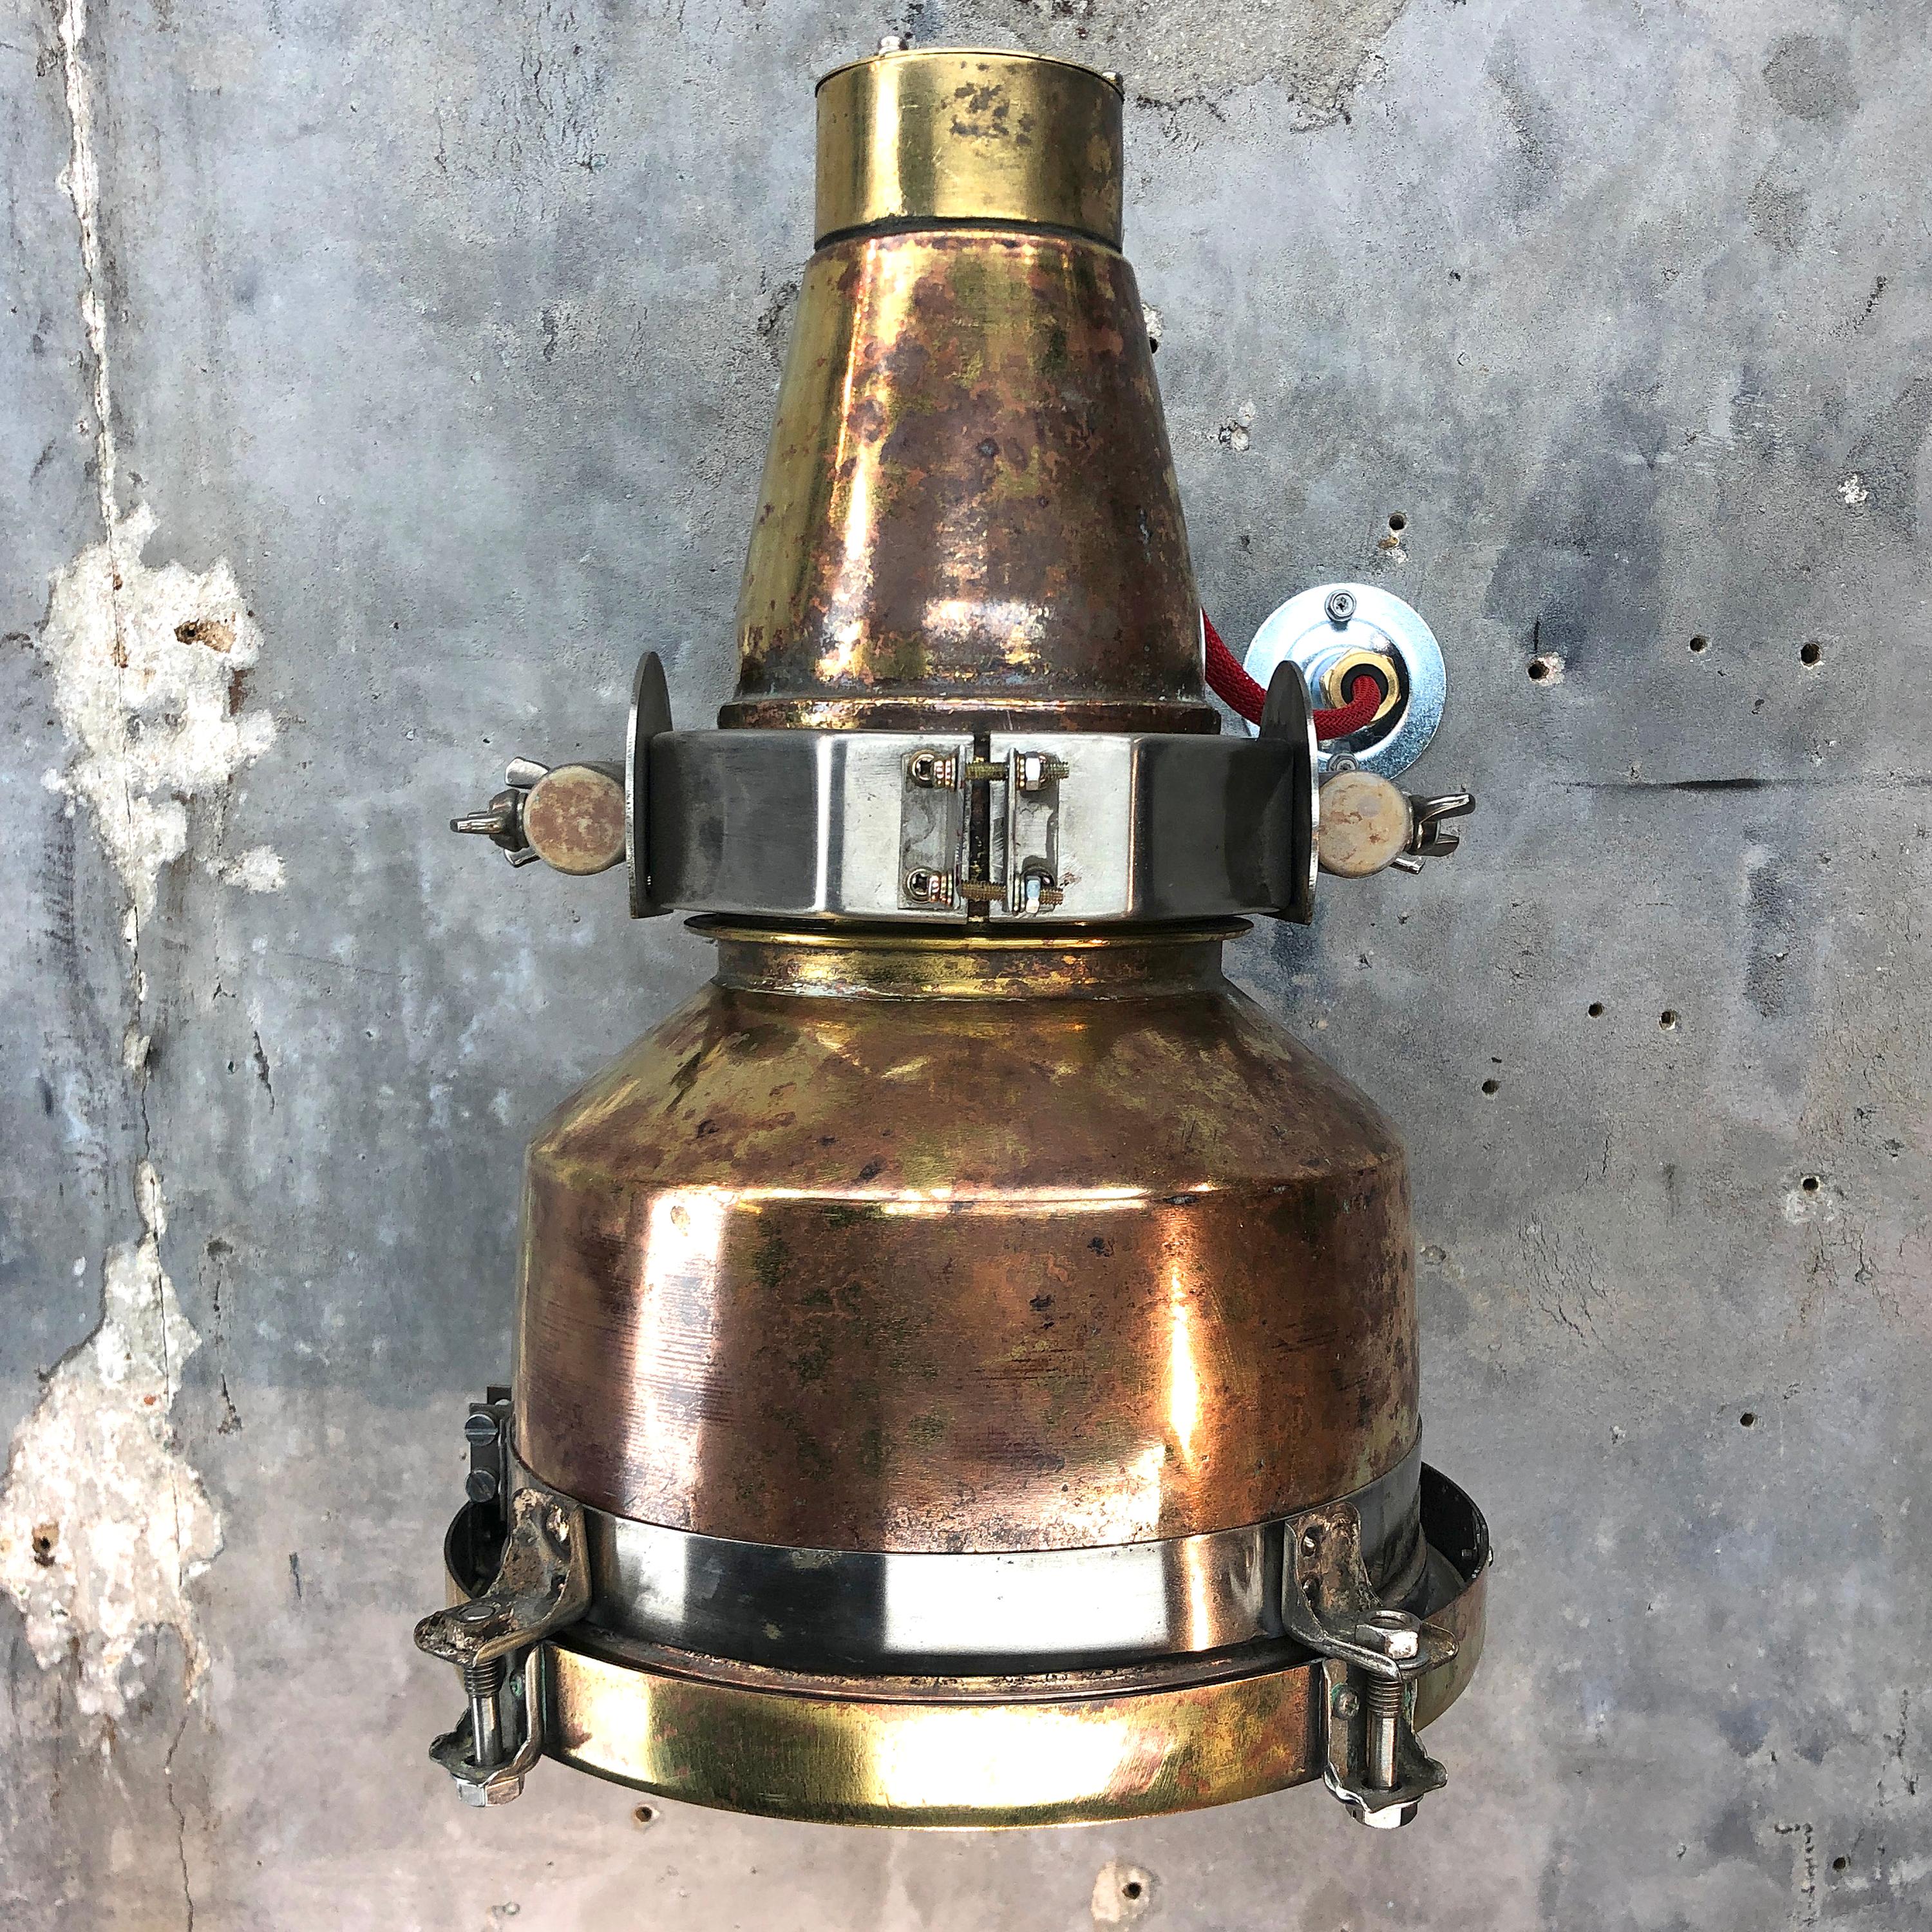 1960s Japanese Spun Brass and Aluminum Architectural Wall Washer Uplighter For Sale 2